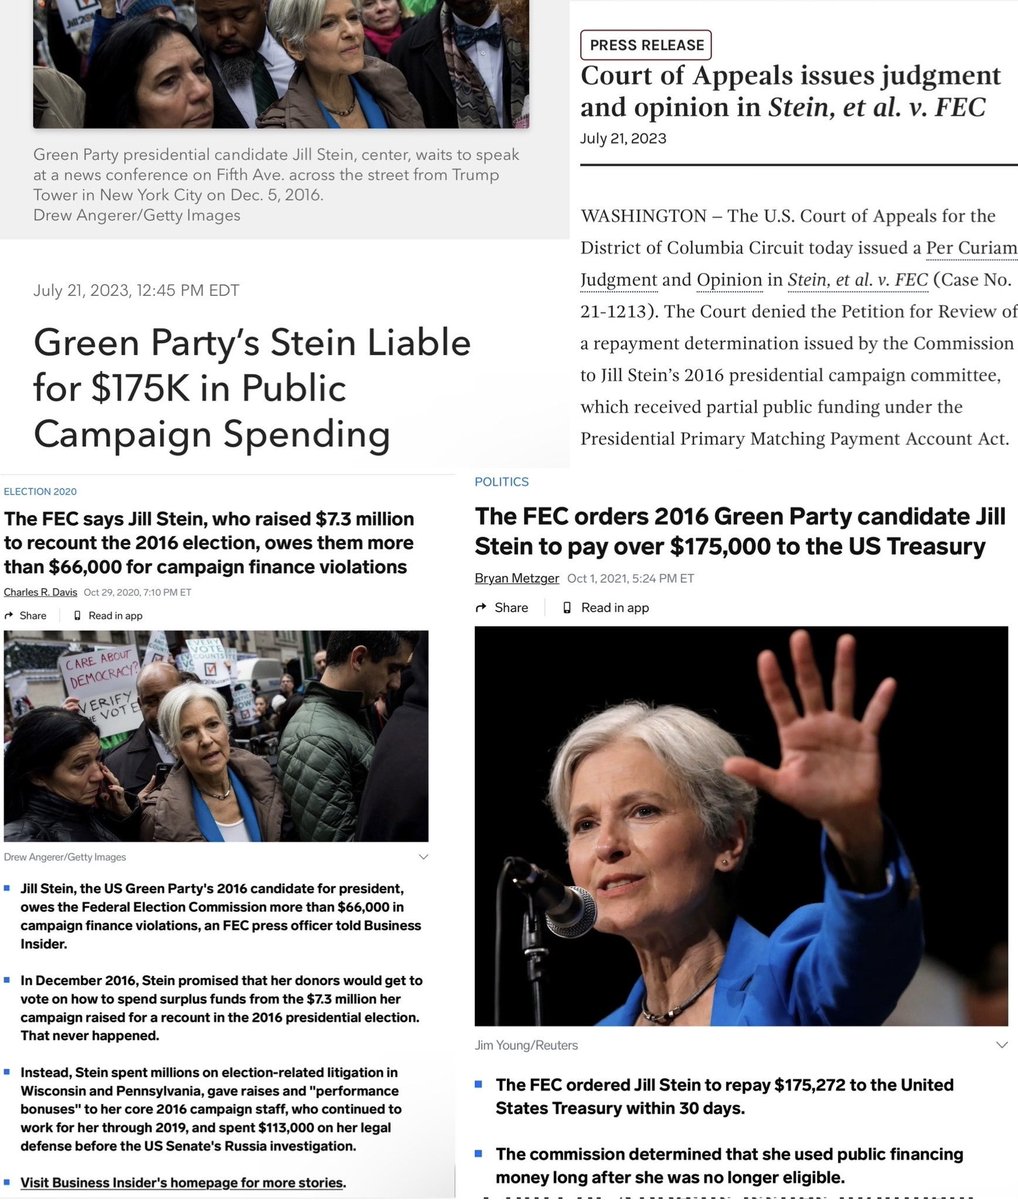 @lanana421 I had no idea #Spoiler4Trump Jill Stein was STILL appealing those 2020 FEC fines from her 2016 campaign finance violations. How do you think she’s committing them as we speak?